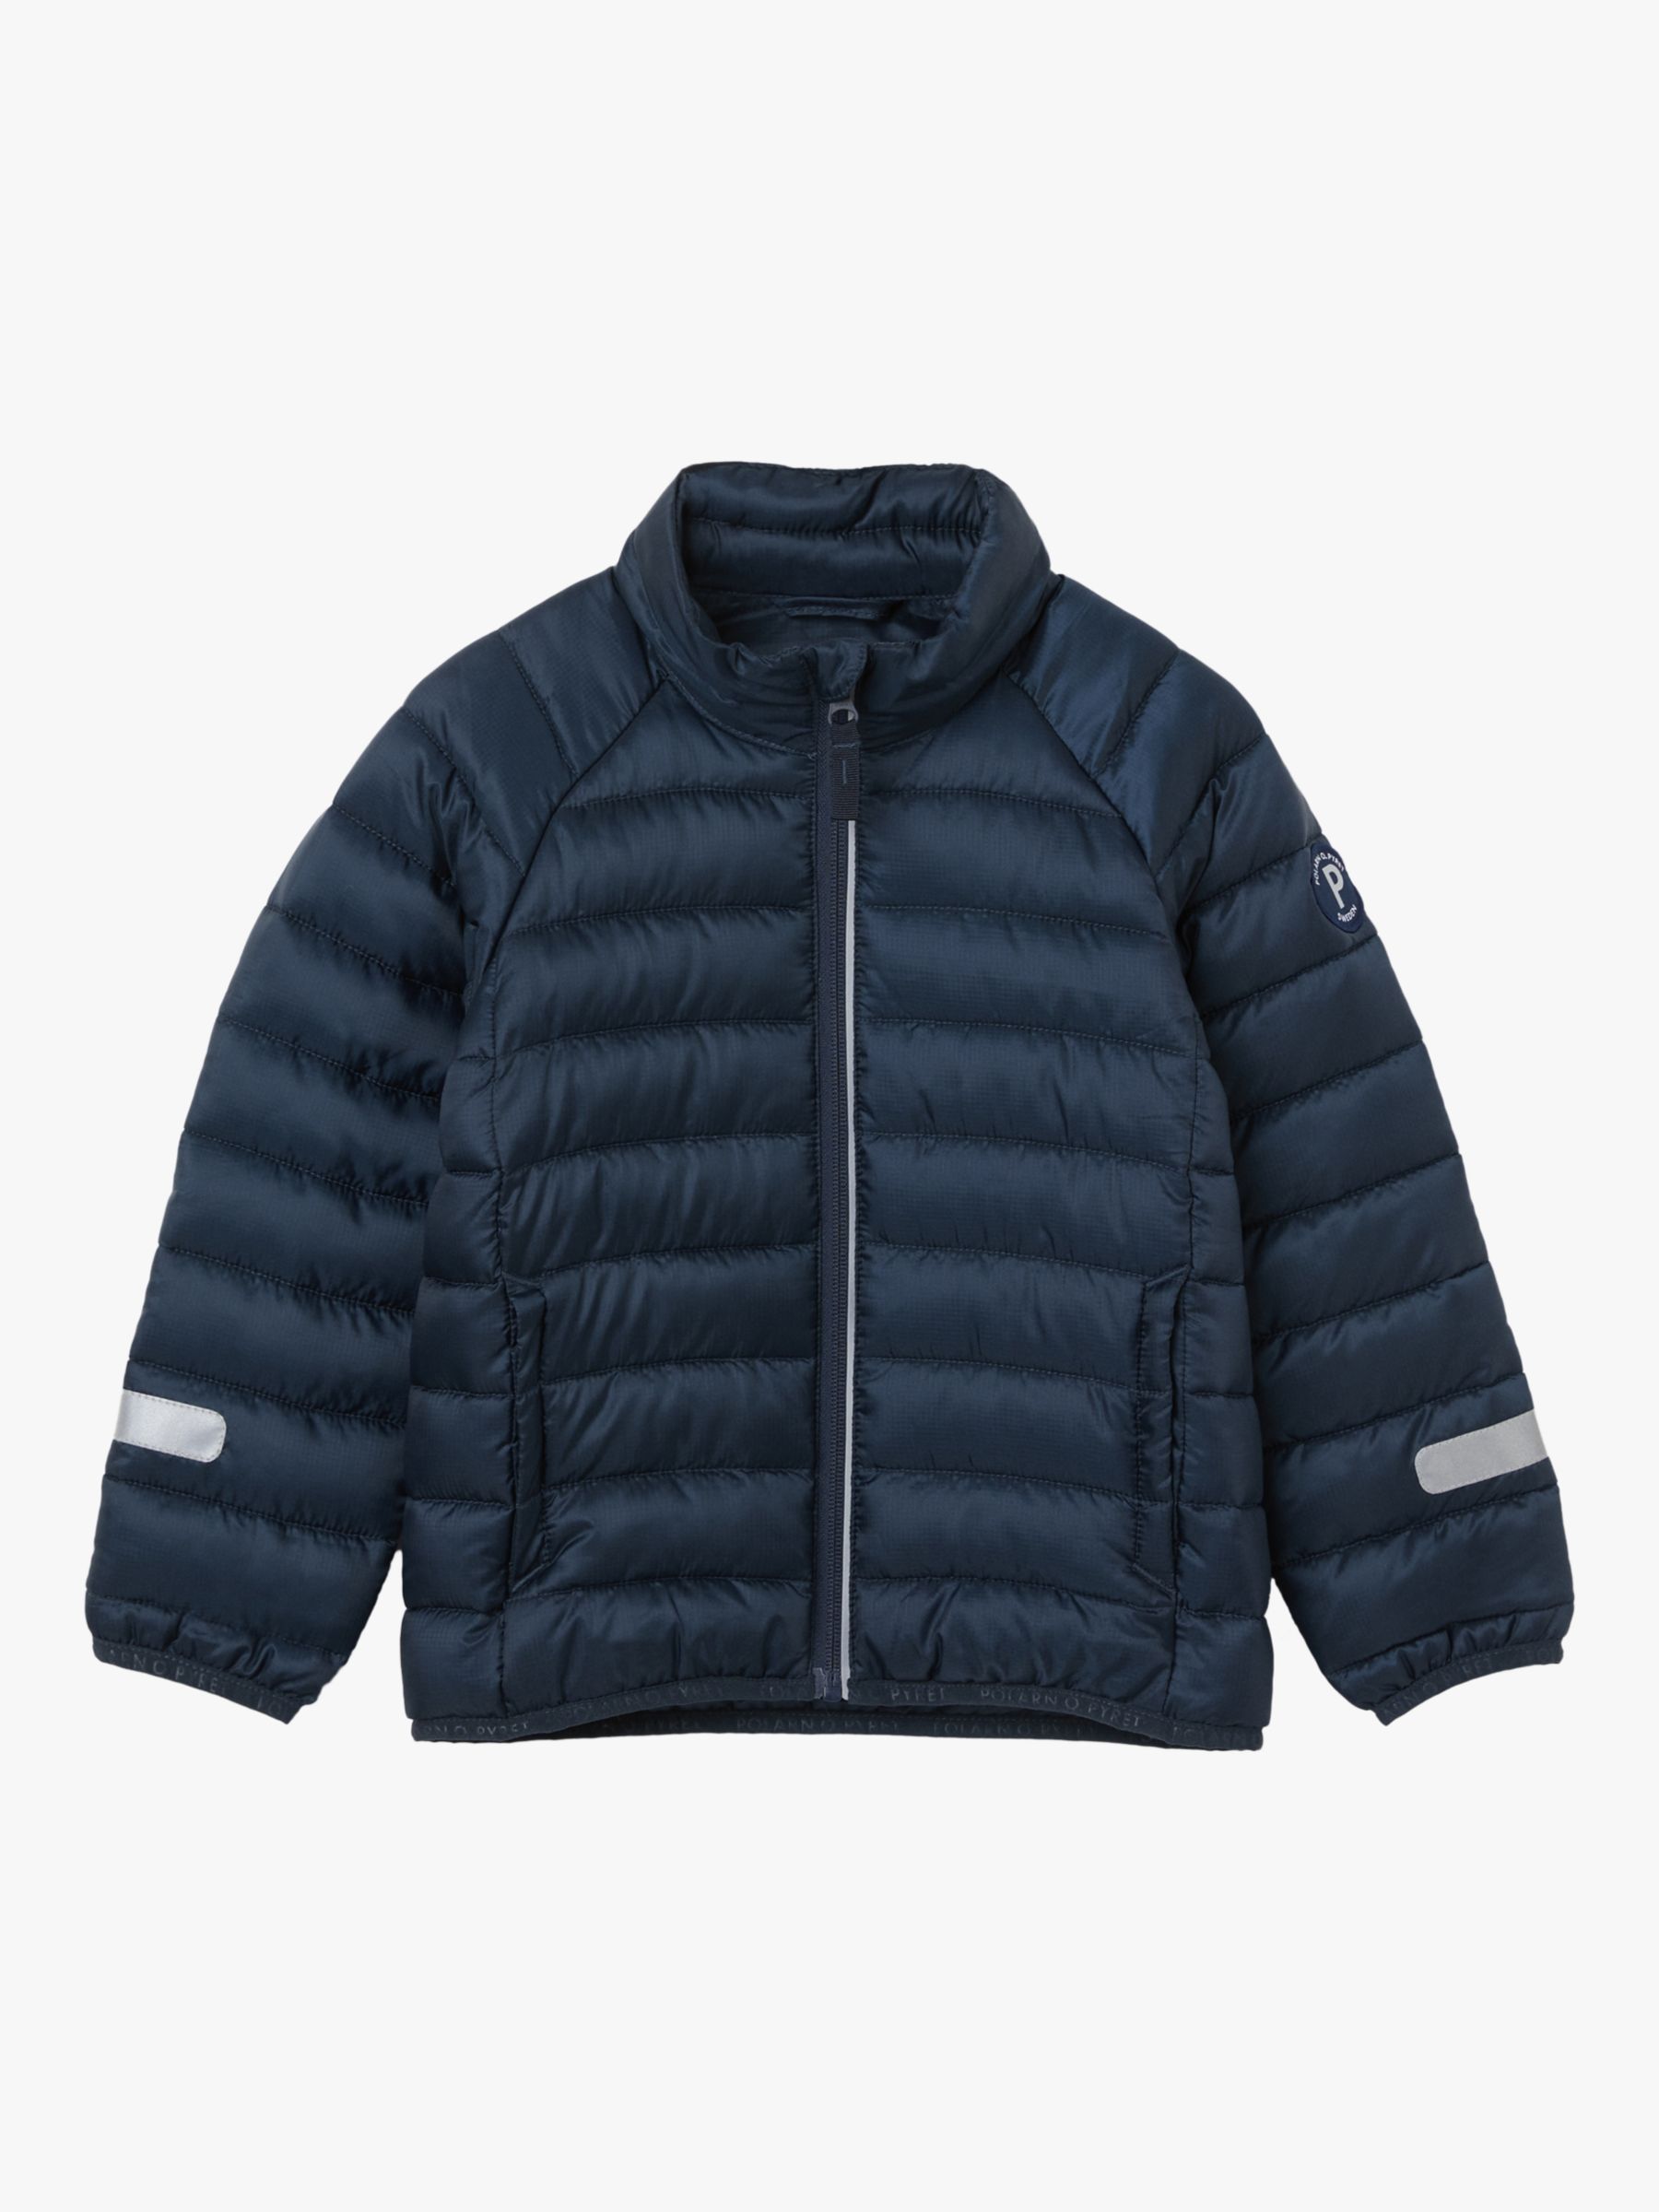 Polarn O. Pyret Baby Quilted Jacket, Navy at John Lewis & Partners